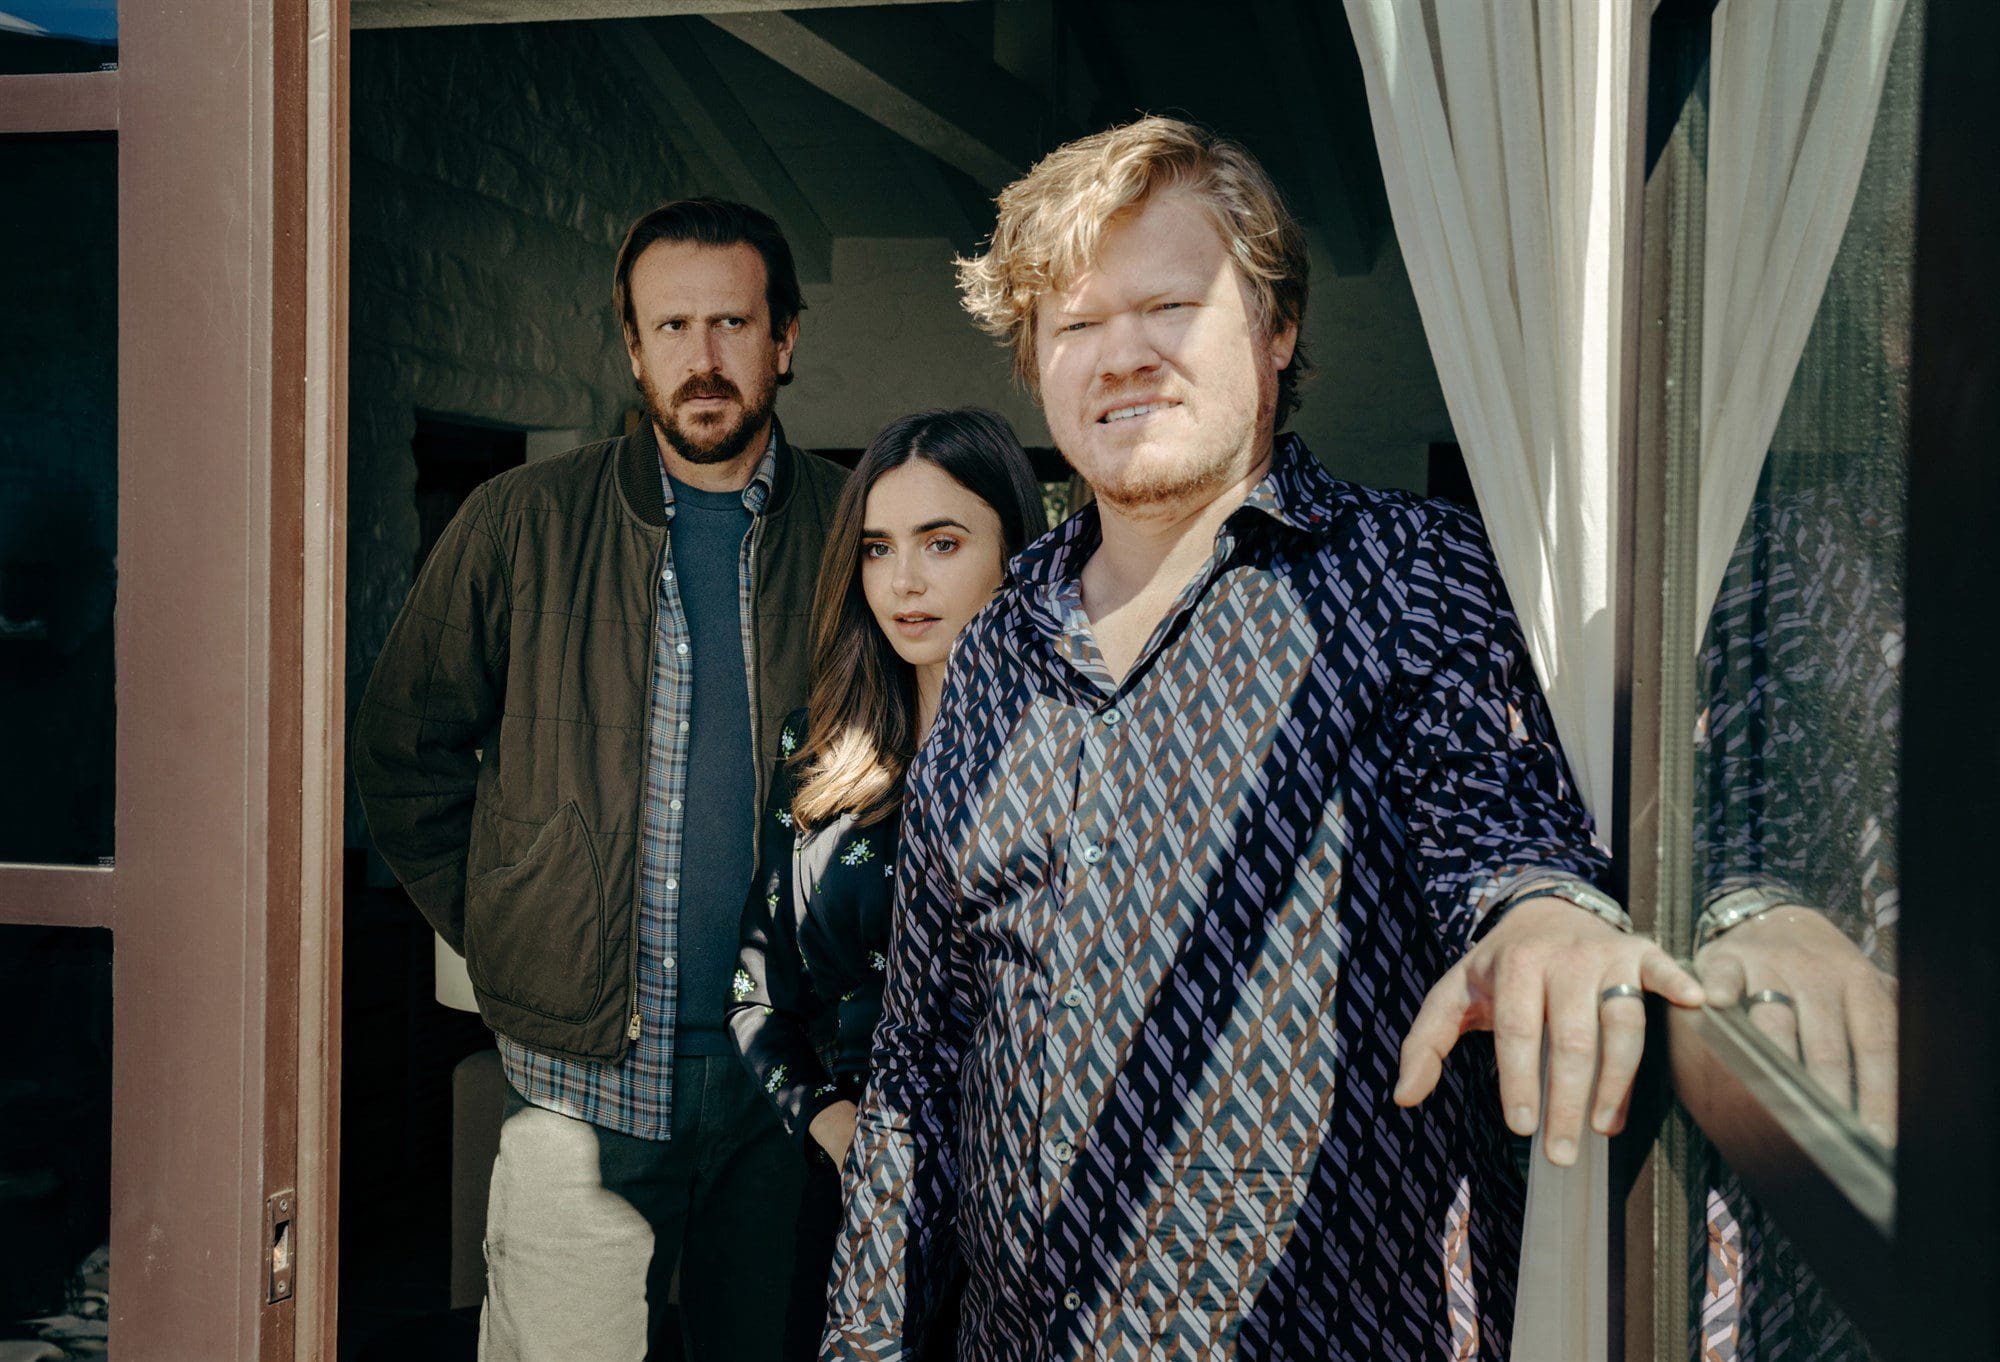 WINDFALL - (L-R) LILY COLLINS as WIFE, JESSE PLEMONS as CEO and JASON SEGEL as NOBODY. 